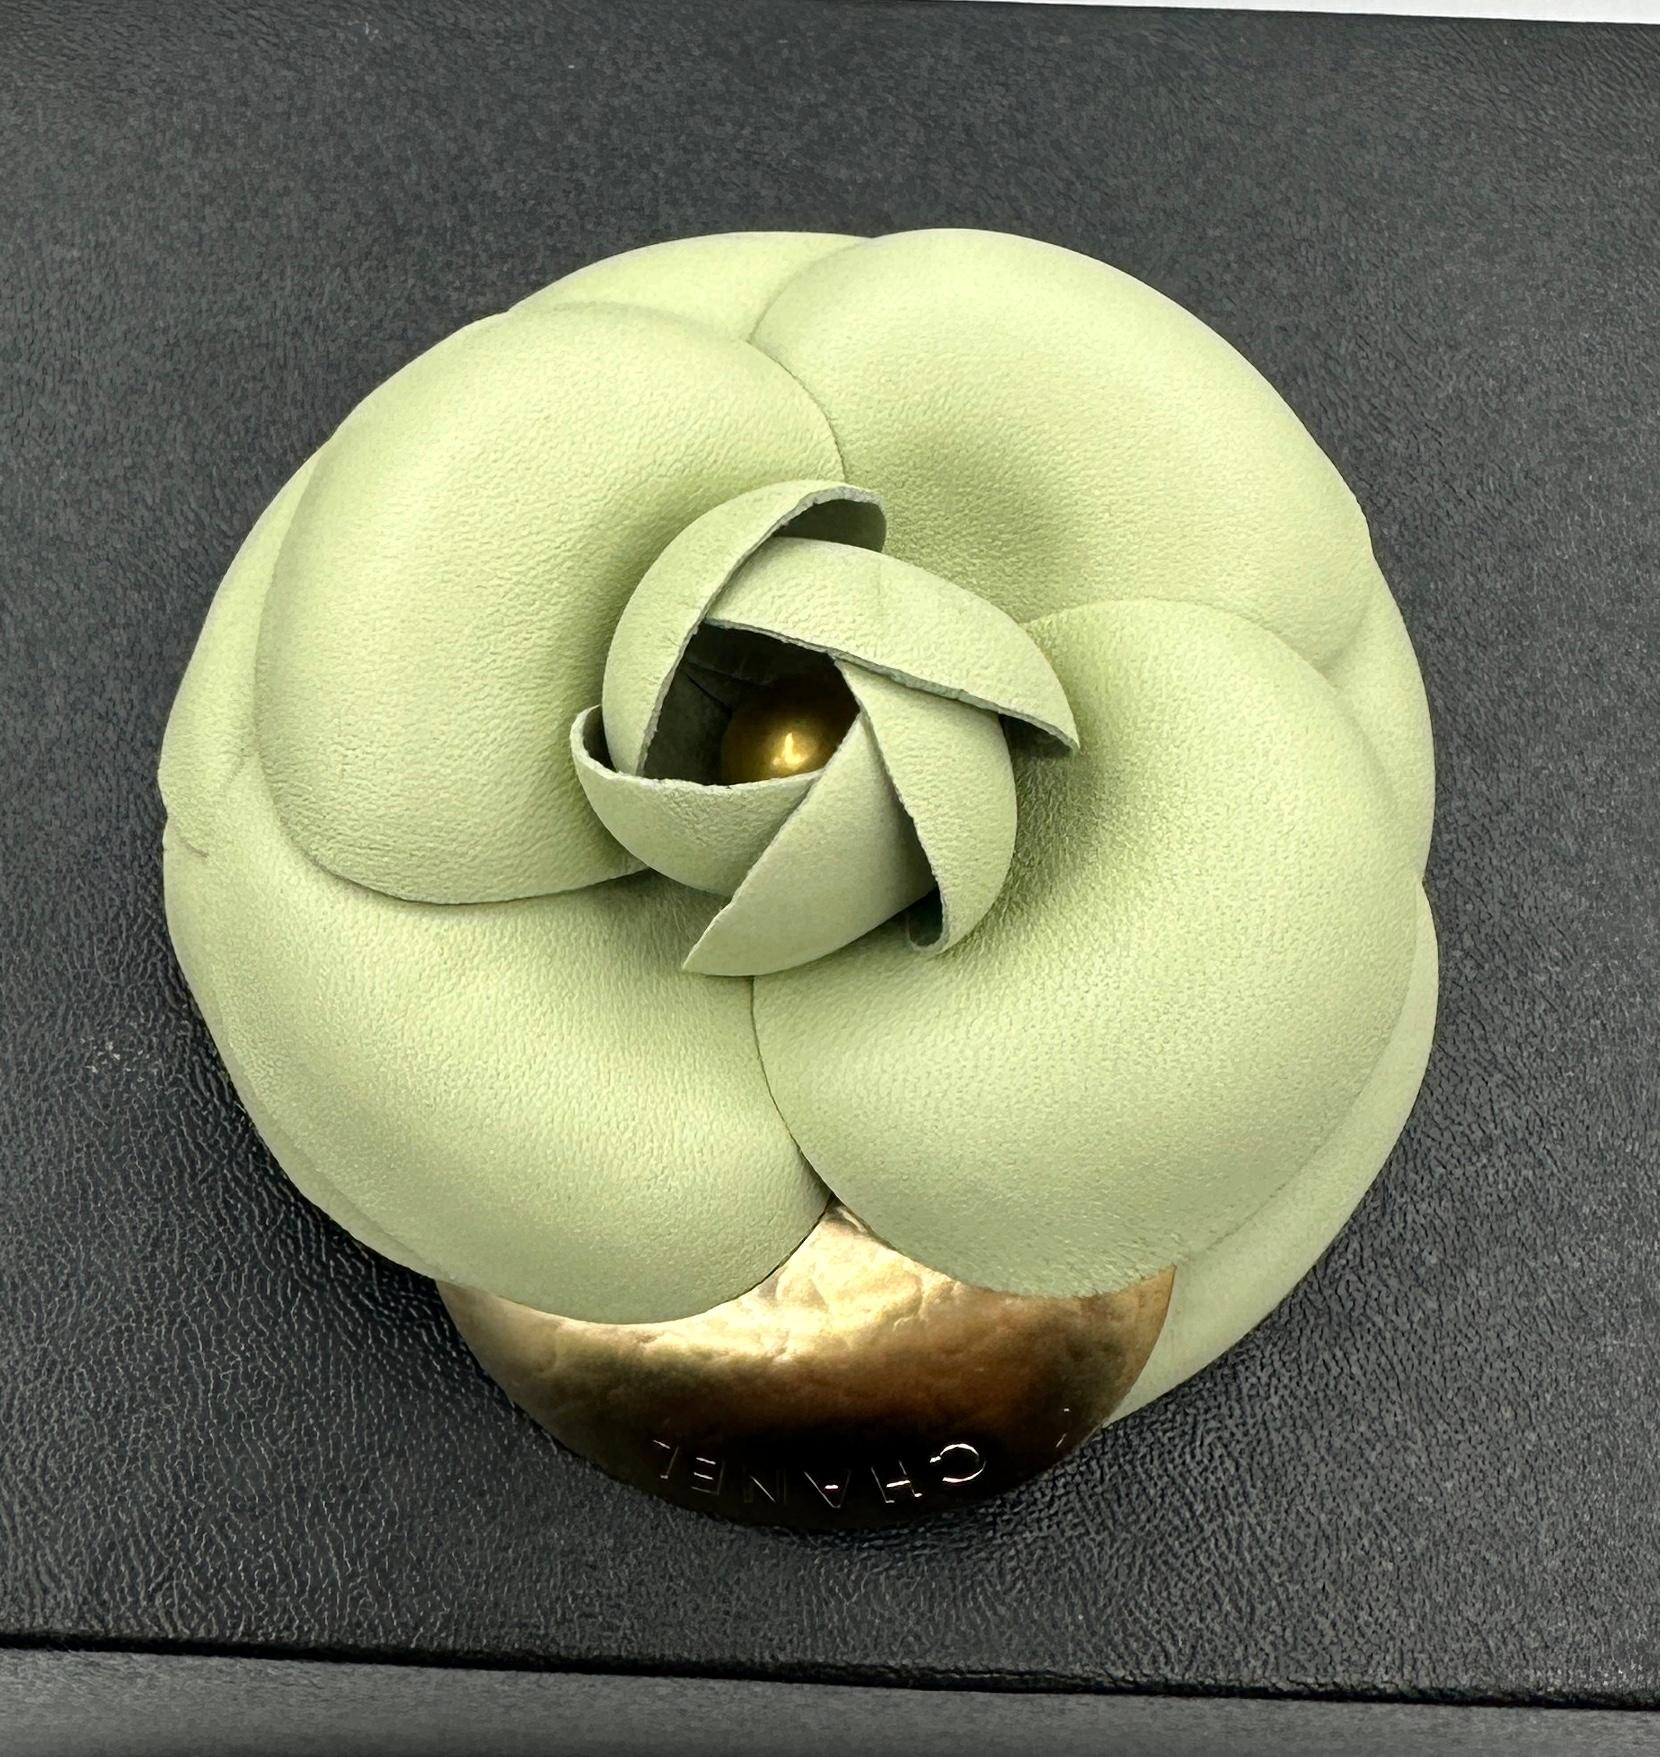 This is a fabulous vintage Chanel Caméllia Flower brooch in pale Seafoam Green Leather with a single gold CHANEL petal.   It is an elegant vintage brooch by the House of Chanel in a very rare and wonderful pale green color.  The rare Camellia Flower